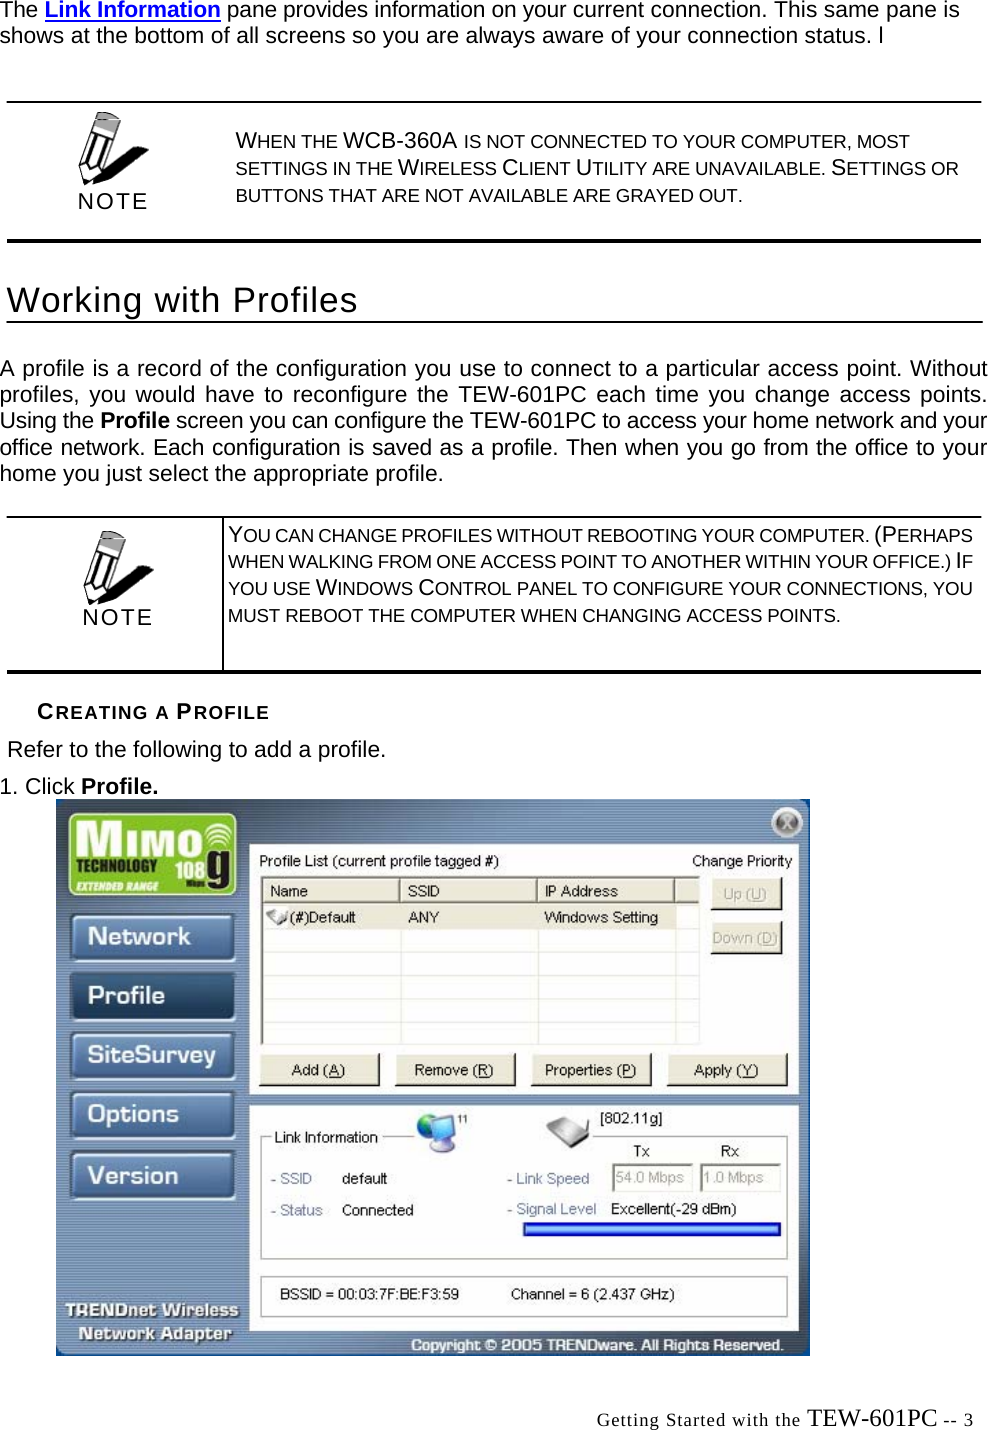  Getting Started with the TEW-601PC -- 3 The Link Information pane provides information on your current connection. This same pane is shows at the bottom of all screens so you are always aware of your connection status. l A profile is a record of the configuration you use to connect to a particular access point. Without profiles, you would have to reconfigure the TEW-601PC each time you change access points. Using the Profile screen you can configure the TEW-601PC to access your home network and your office network. Each configuration is saved as a profile. Then when you go from the office to your home you just select the appropriate profile. CREATING A PROFILE Refer to the following to add a profile. 1. Click Profile.    WHEN THE WCB-360A IS NOT CONNECTED TO YOUR COMPUTER, MOST SETTINGS IN THE WIRELESS CLIENT UTILITY ARE UNAVAILABLE. SETTINGS OR BUTTONS THAT ARE NOT AVAILABLE ARE GRAYED OUT. Working with Profiles  NOTE  YOU CAN CHANGE PROFILES WITHOUT REBOOTING YOUR COMPUTER. (PERHAPS WHEN WALKING FROM ONE ACCESS POINT TO ANOTHER WITHIN YOUR OFFICE.) IFYOU USE WINDOWS CONTROL PANEL TO CONFIGURE YOUR CONNECTIONS, YOU MUST REBOOT THE COMPUTER WHEN CHANGING ACCESS POINTS.  NOTE 